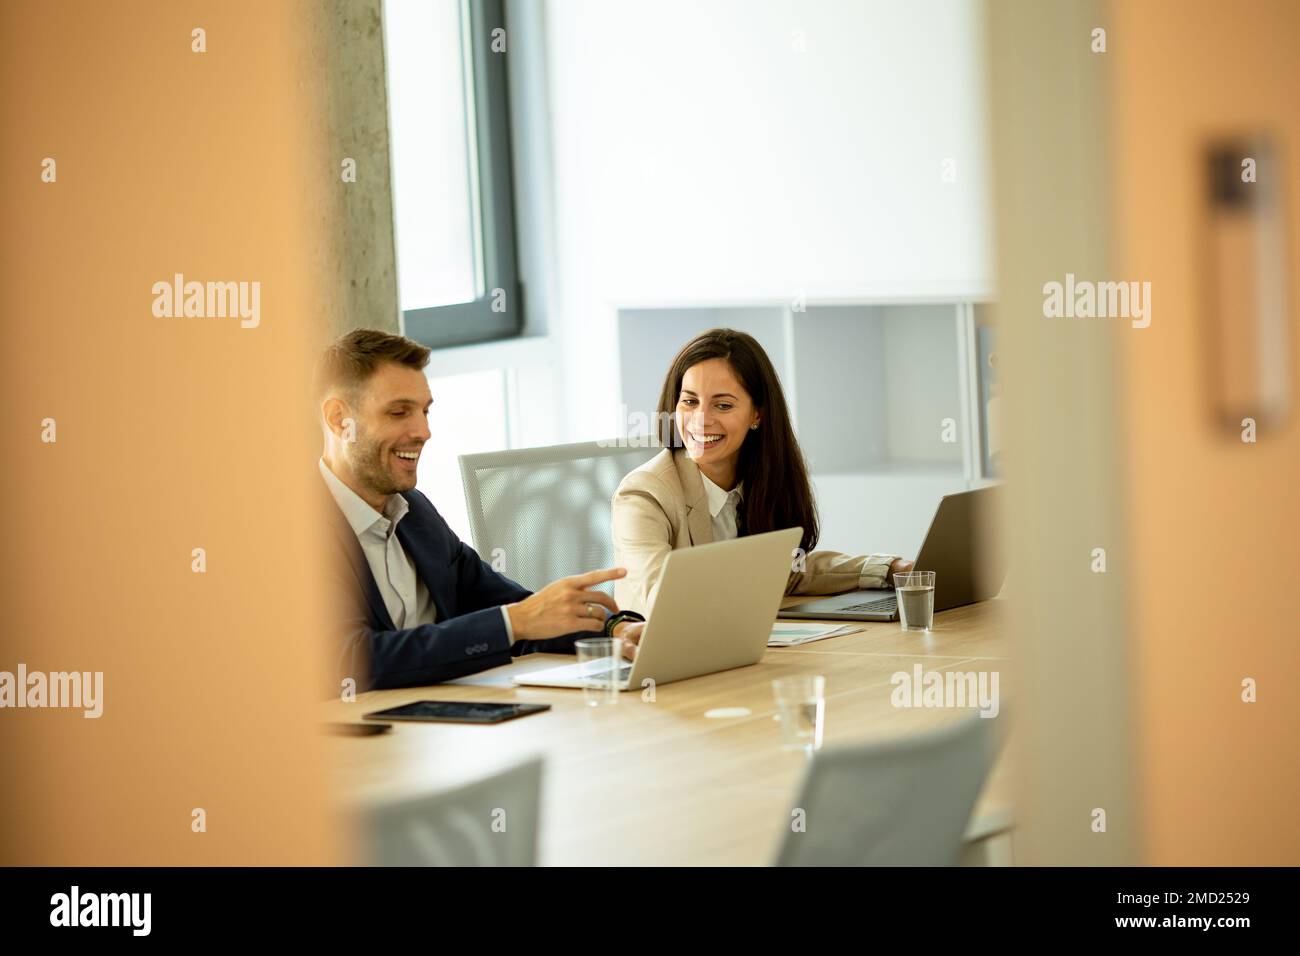 Businessman and businesswoman working together in office Stock Photo